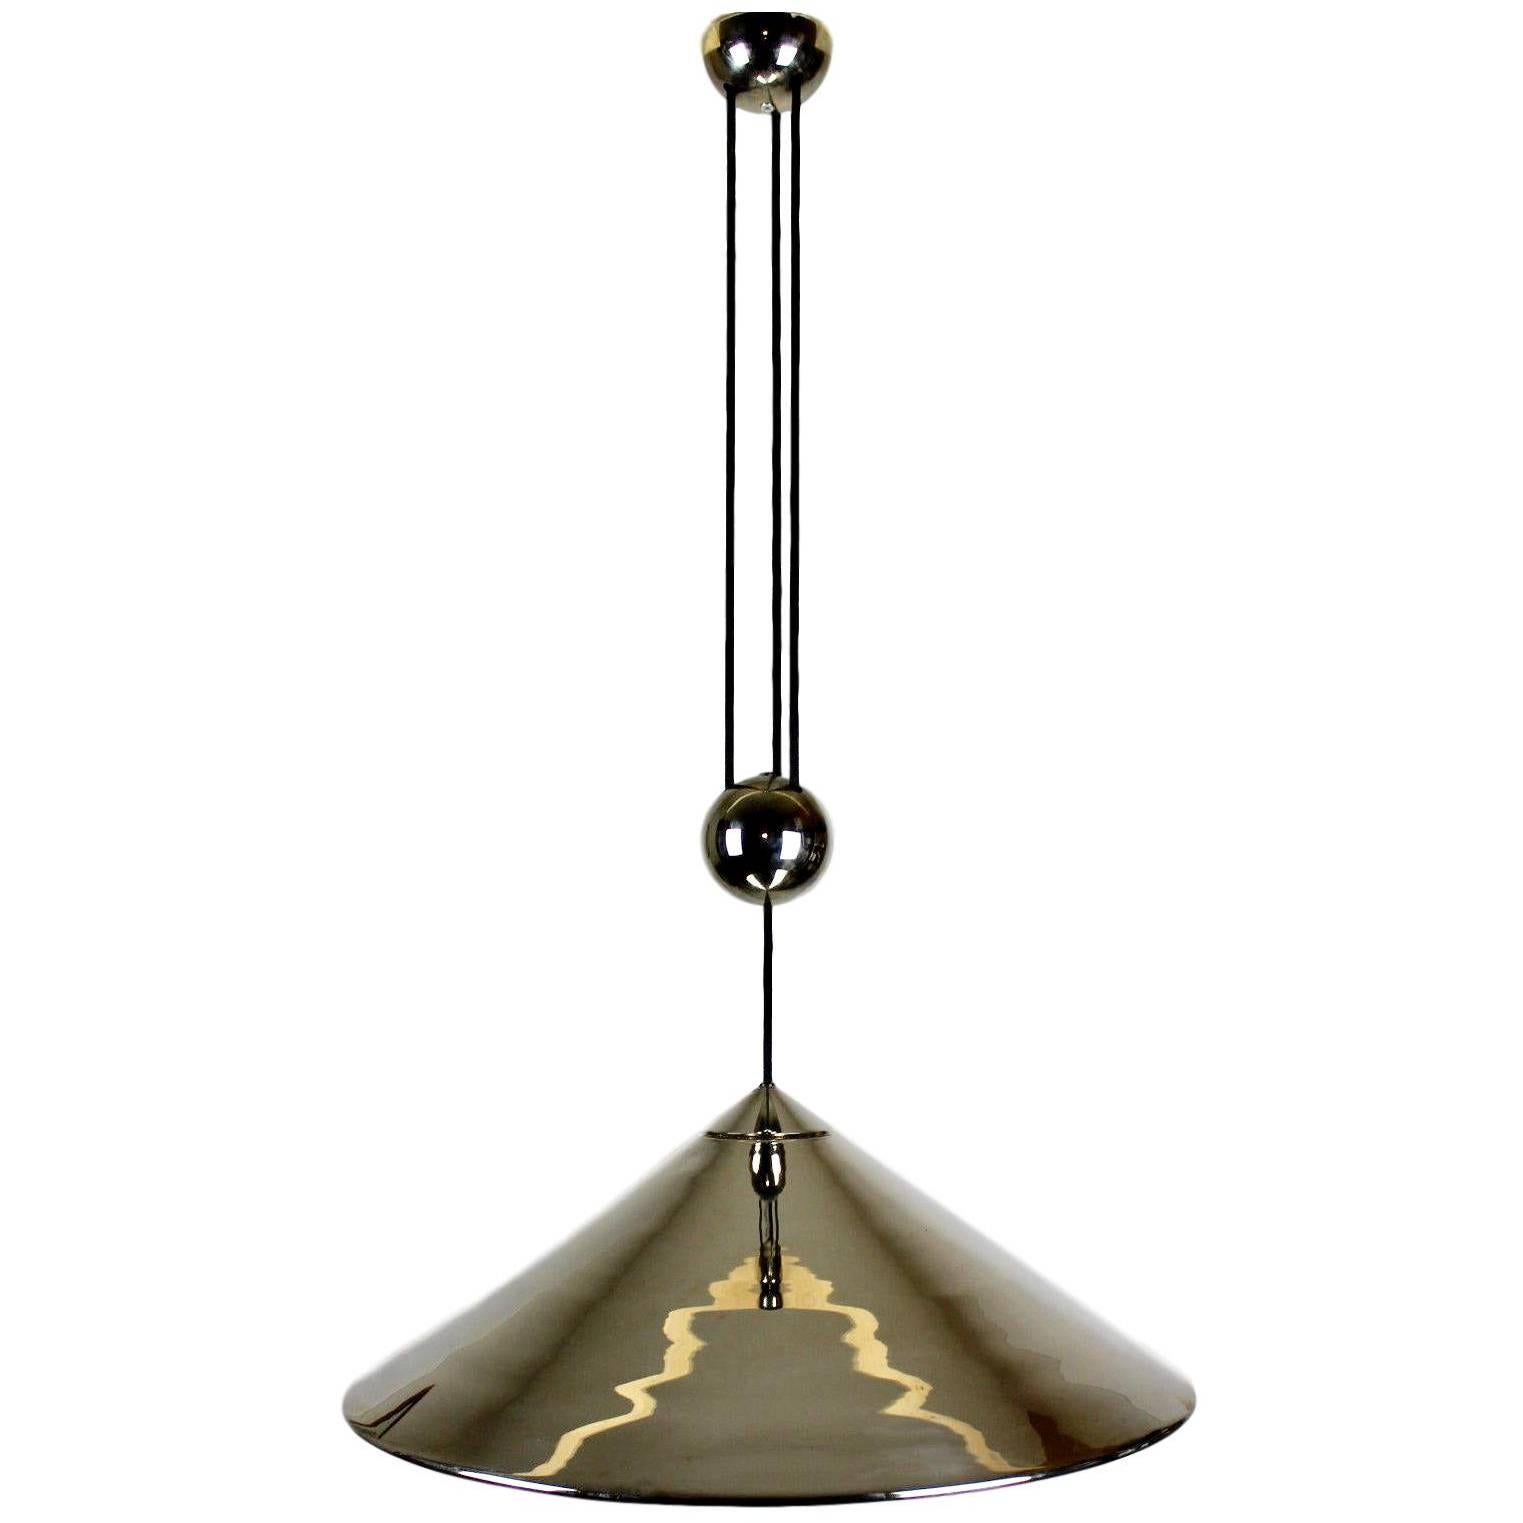 Florian Schulz Counter-Balance Pendant in Polished Nickel